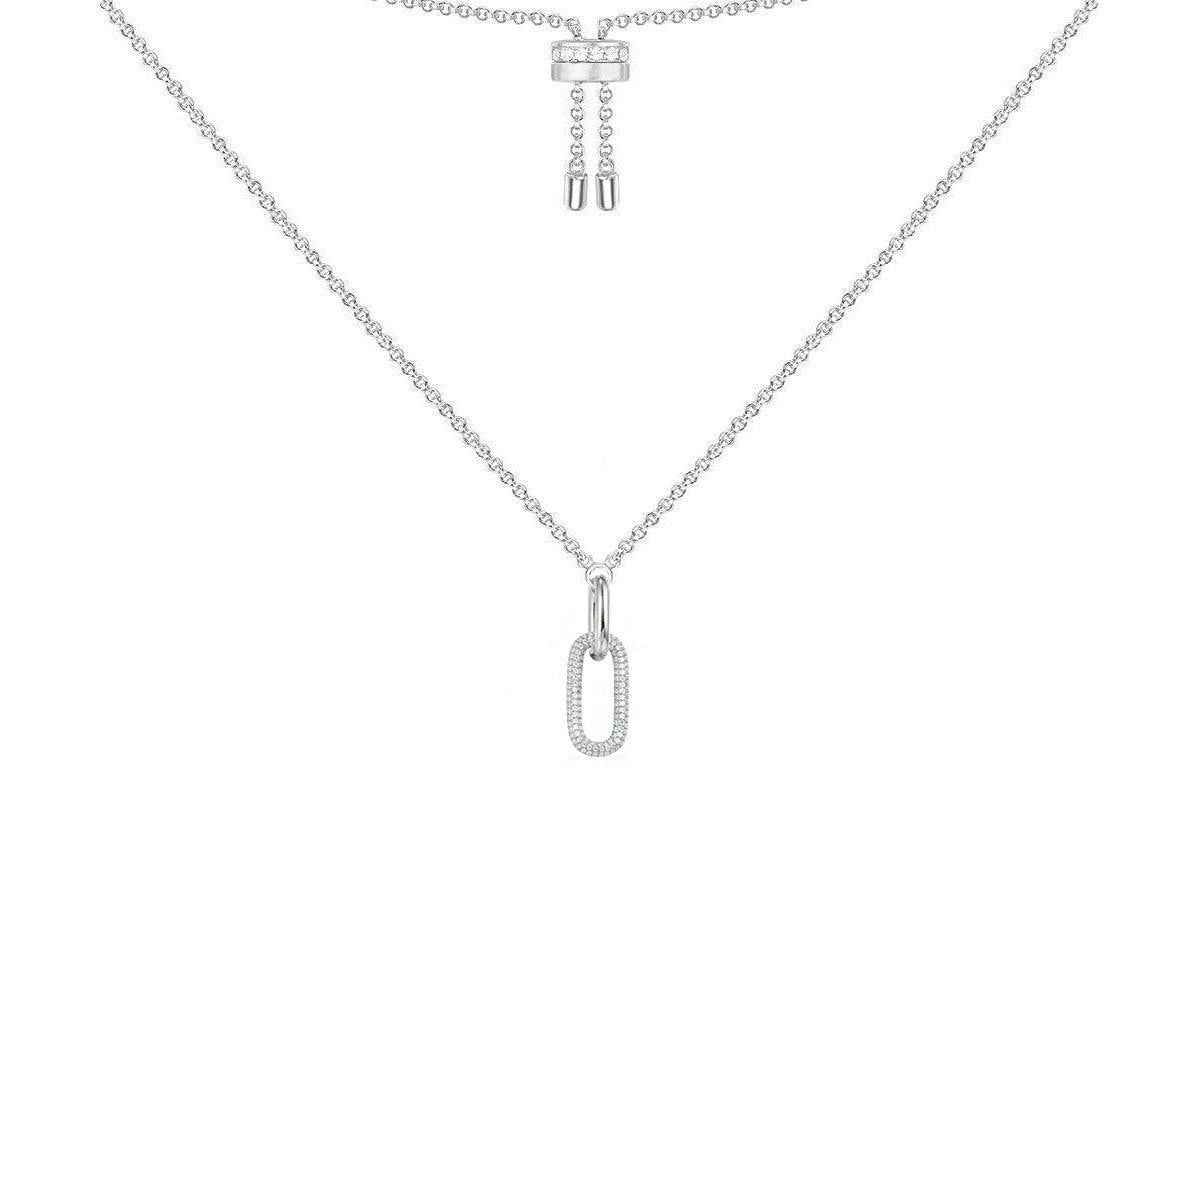 Necklace N1259 - 925 Sterling Silver - Asfour Crystal